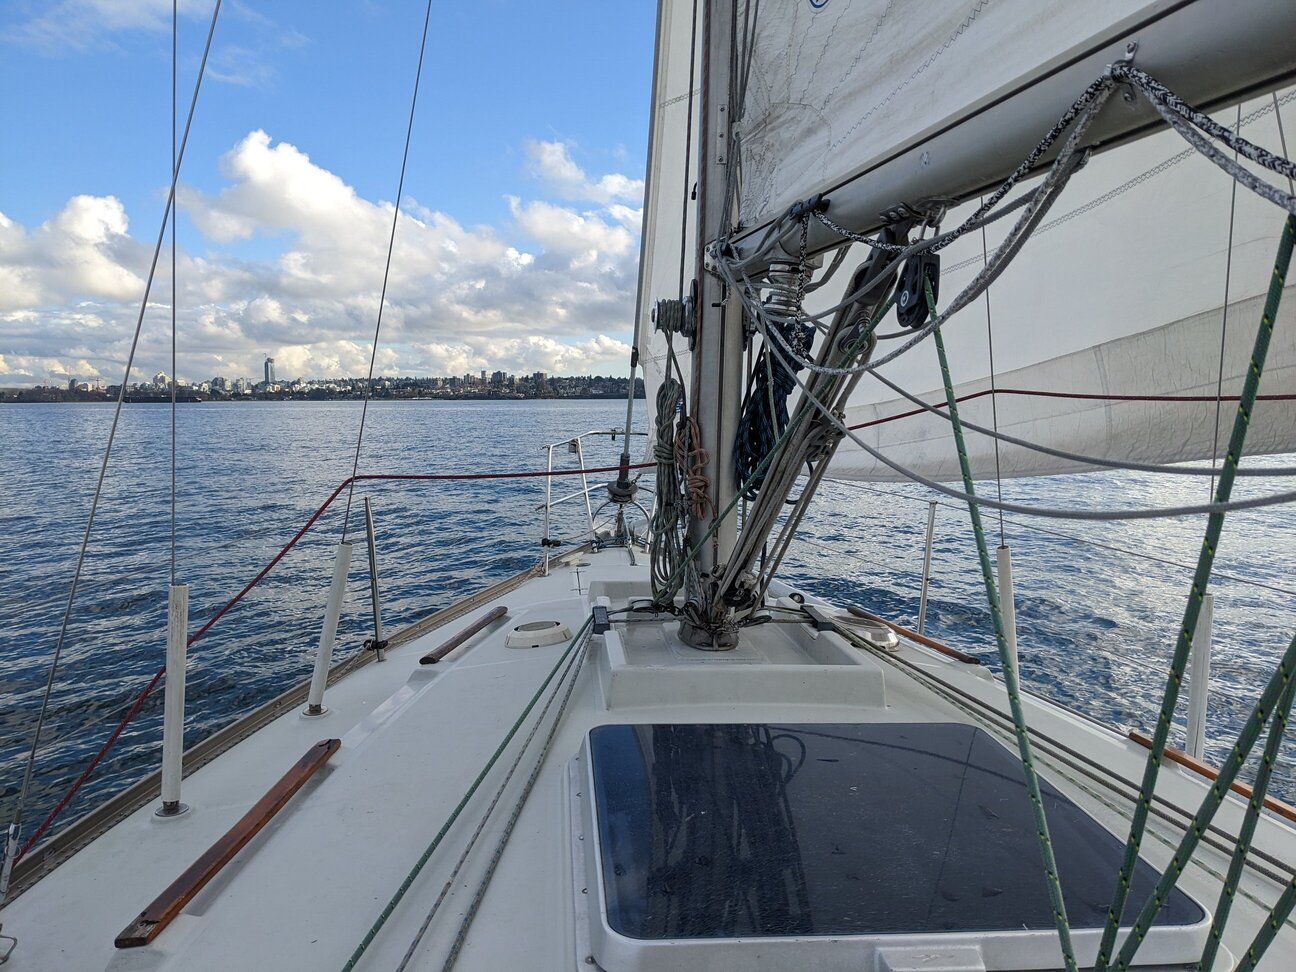 Looking ahead on a sailboat from the cockpit.